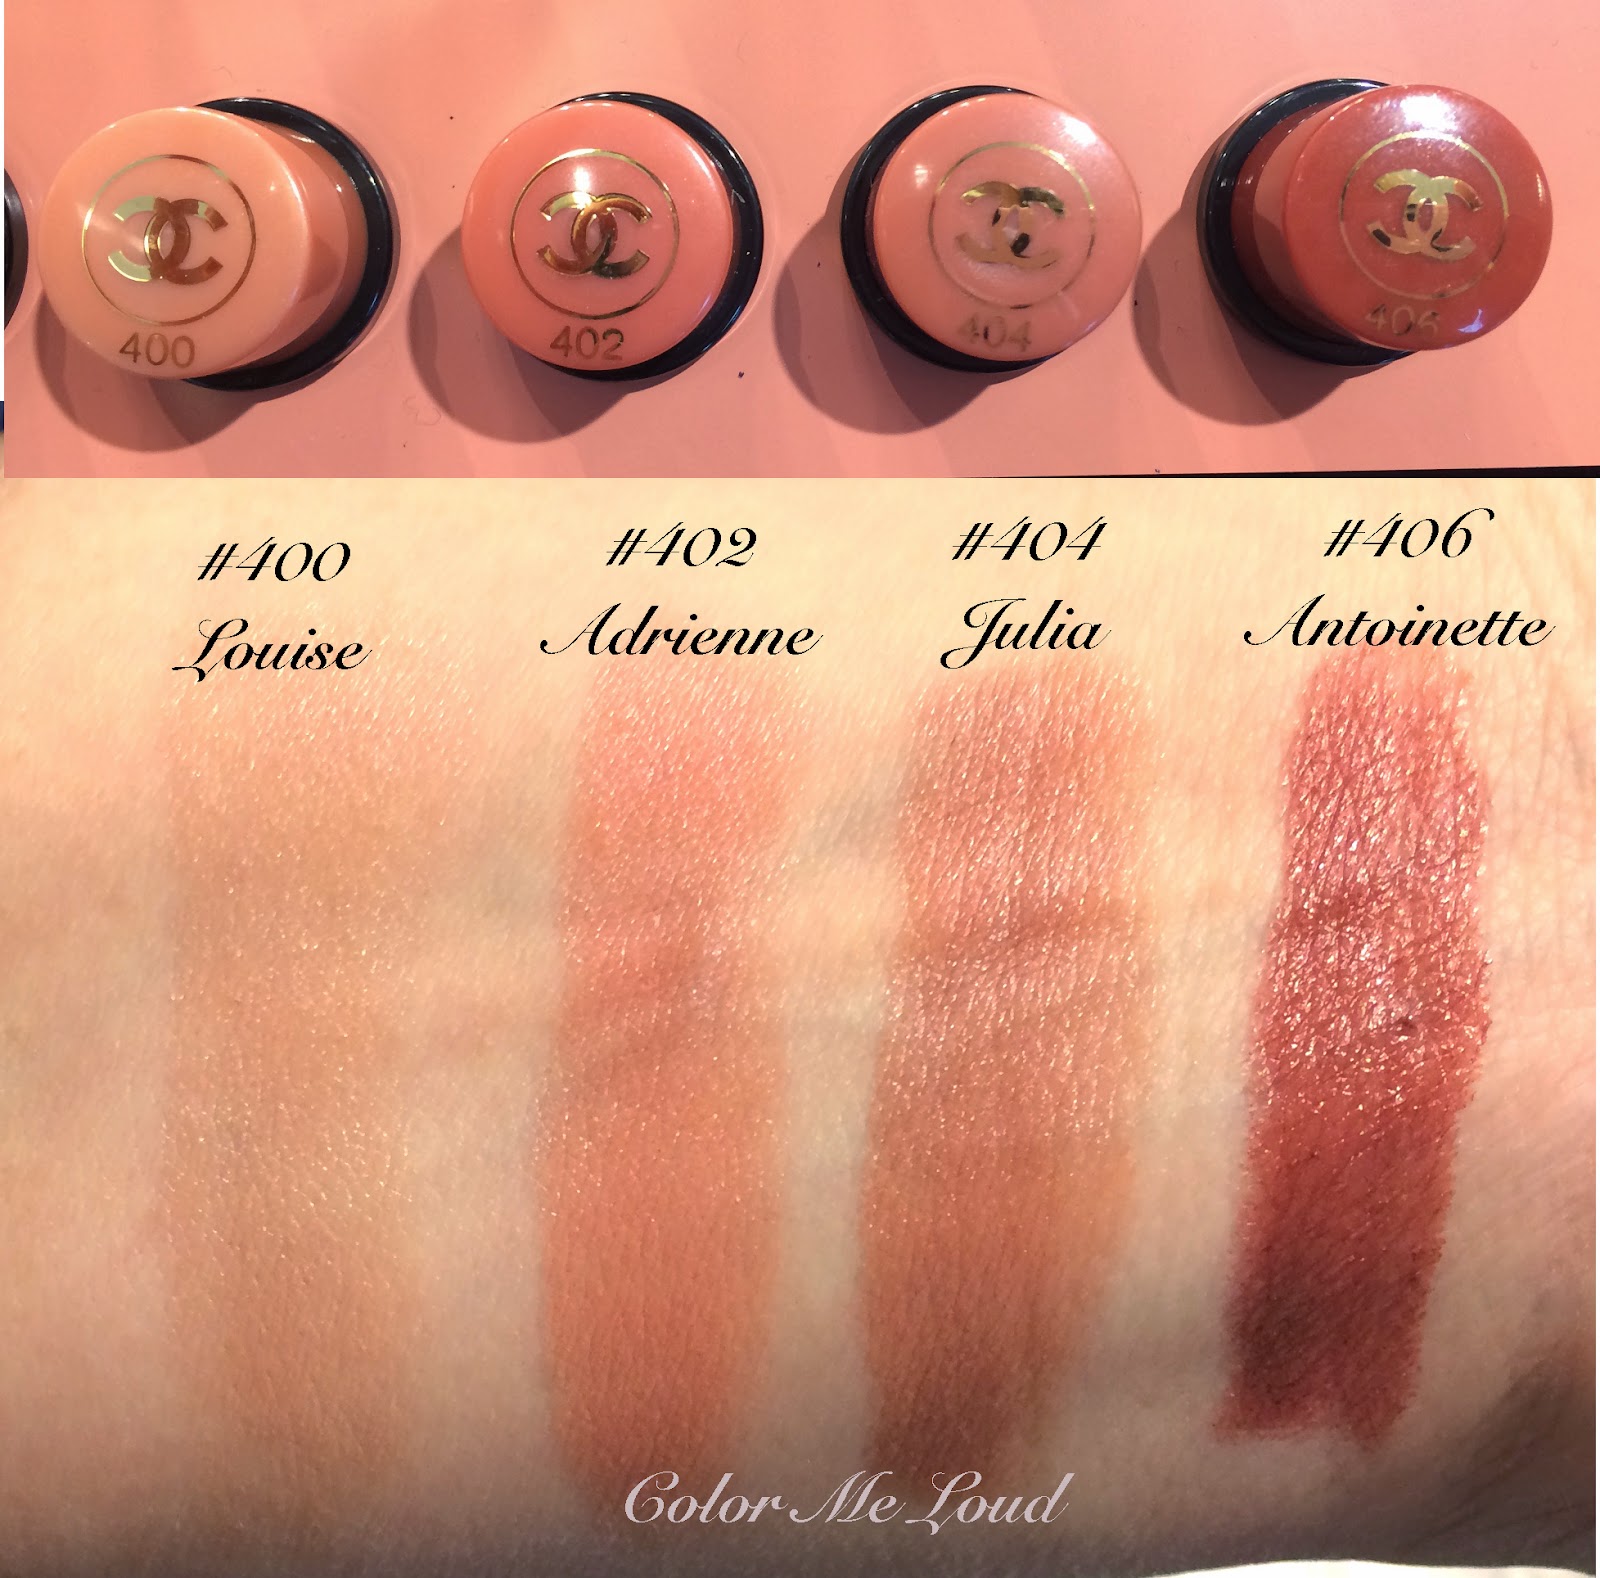 Chanel Coco Lipstick Relaunch, Swatches of All The Shades, Spring 2015 | Color Me Loud